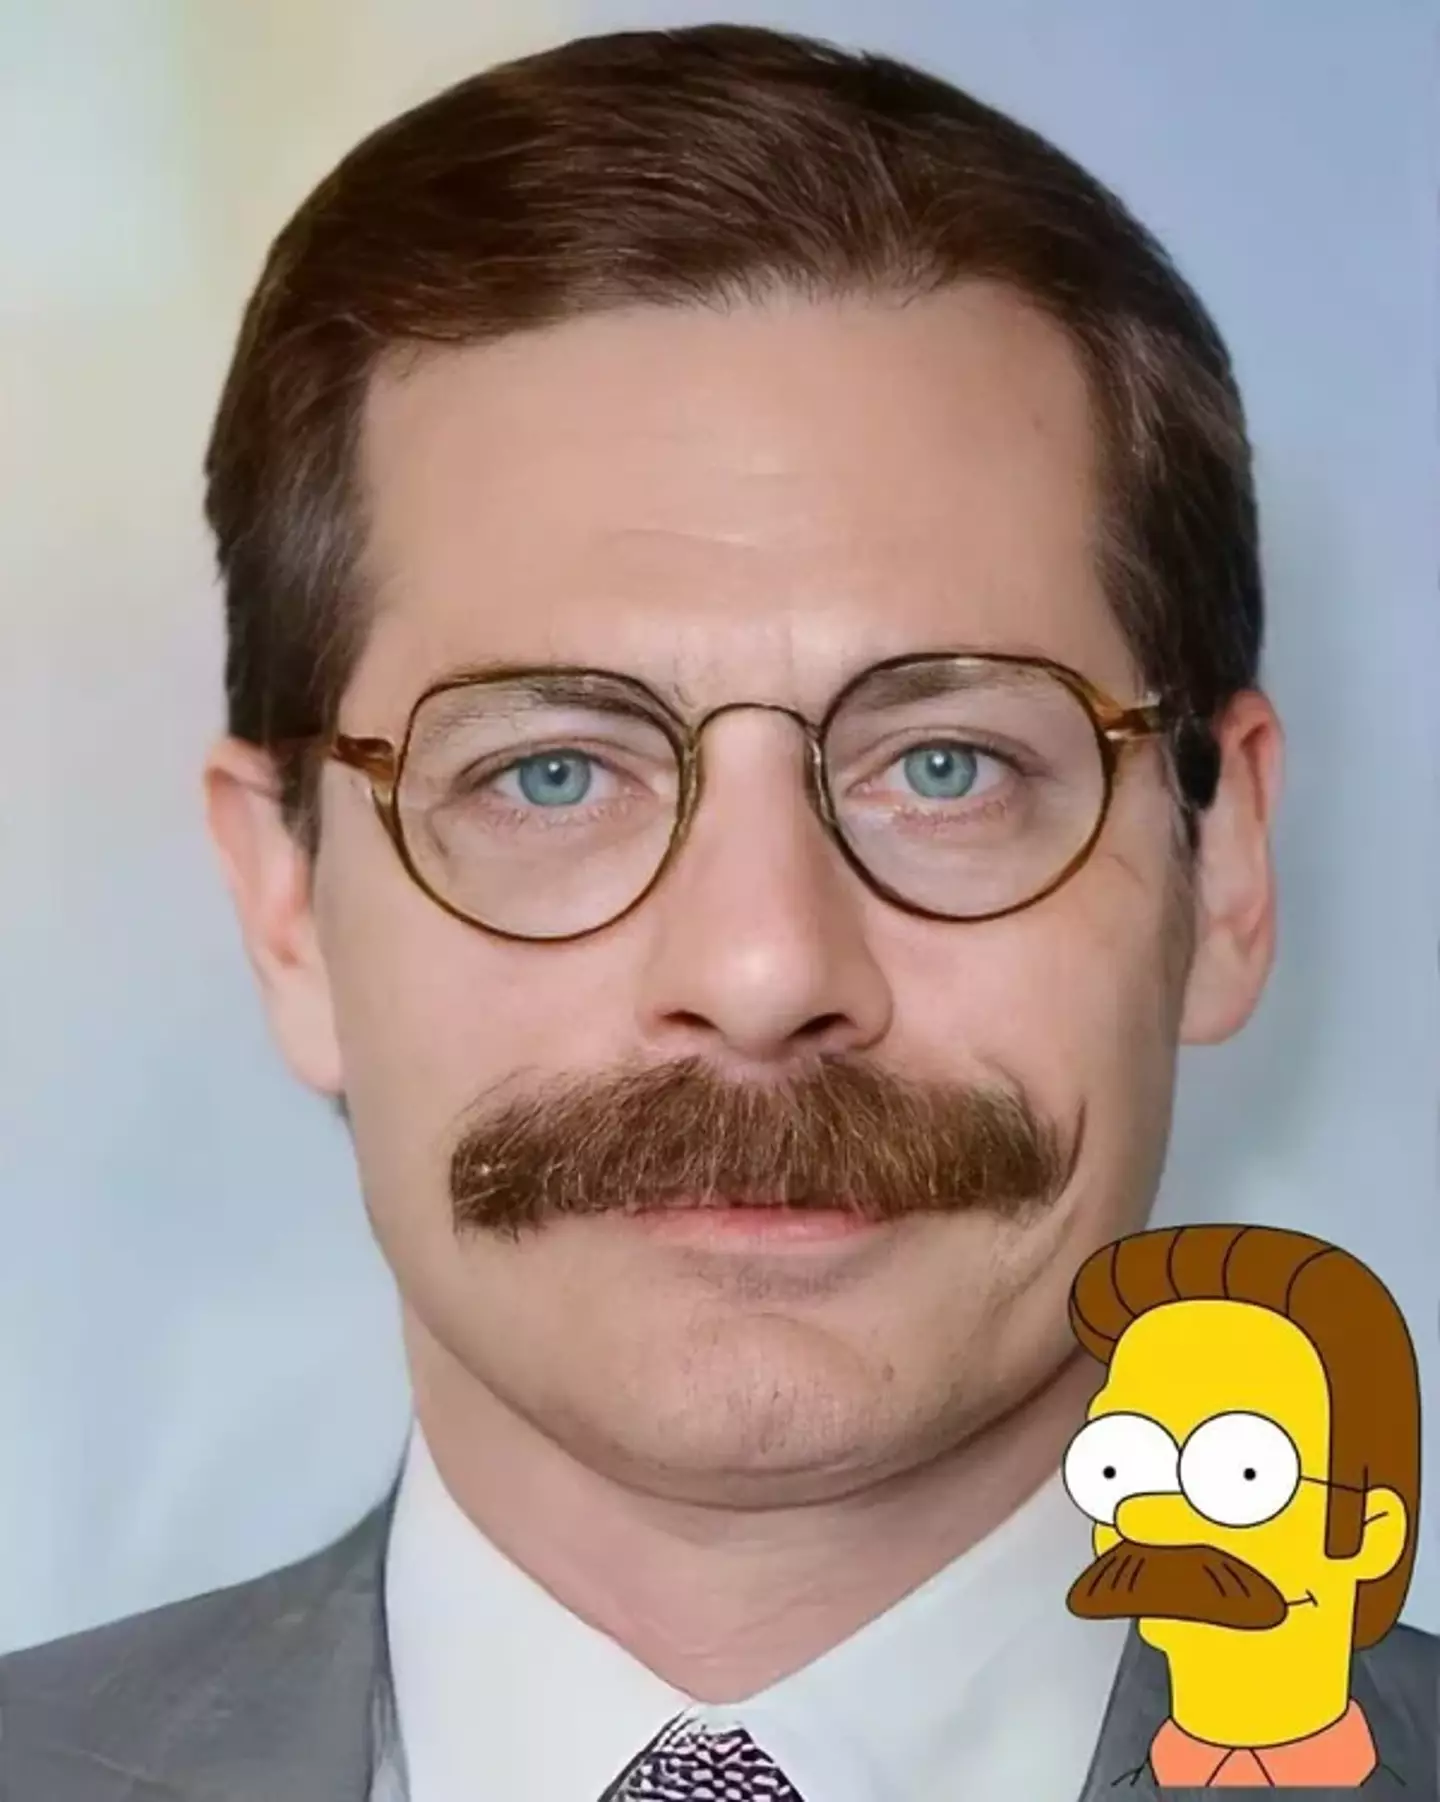 Ned Flanders is spot on, I must say.